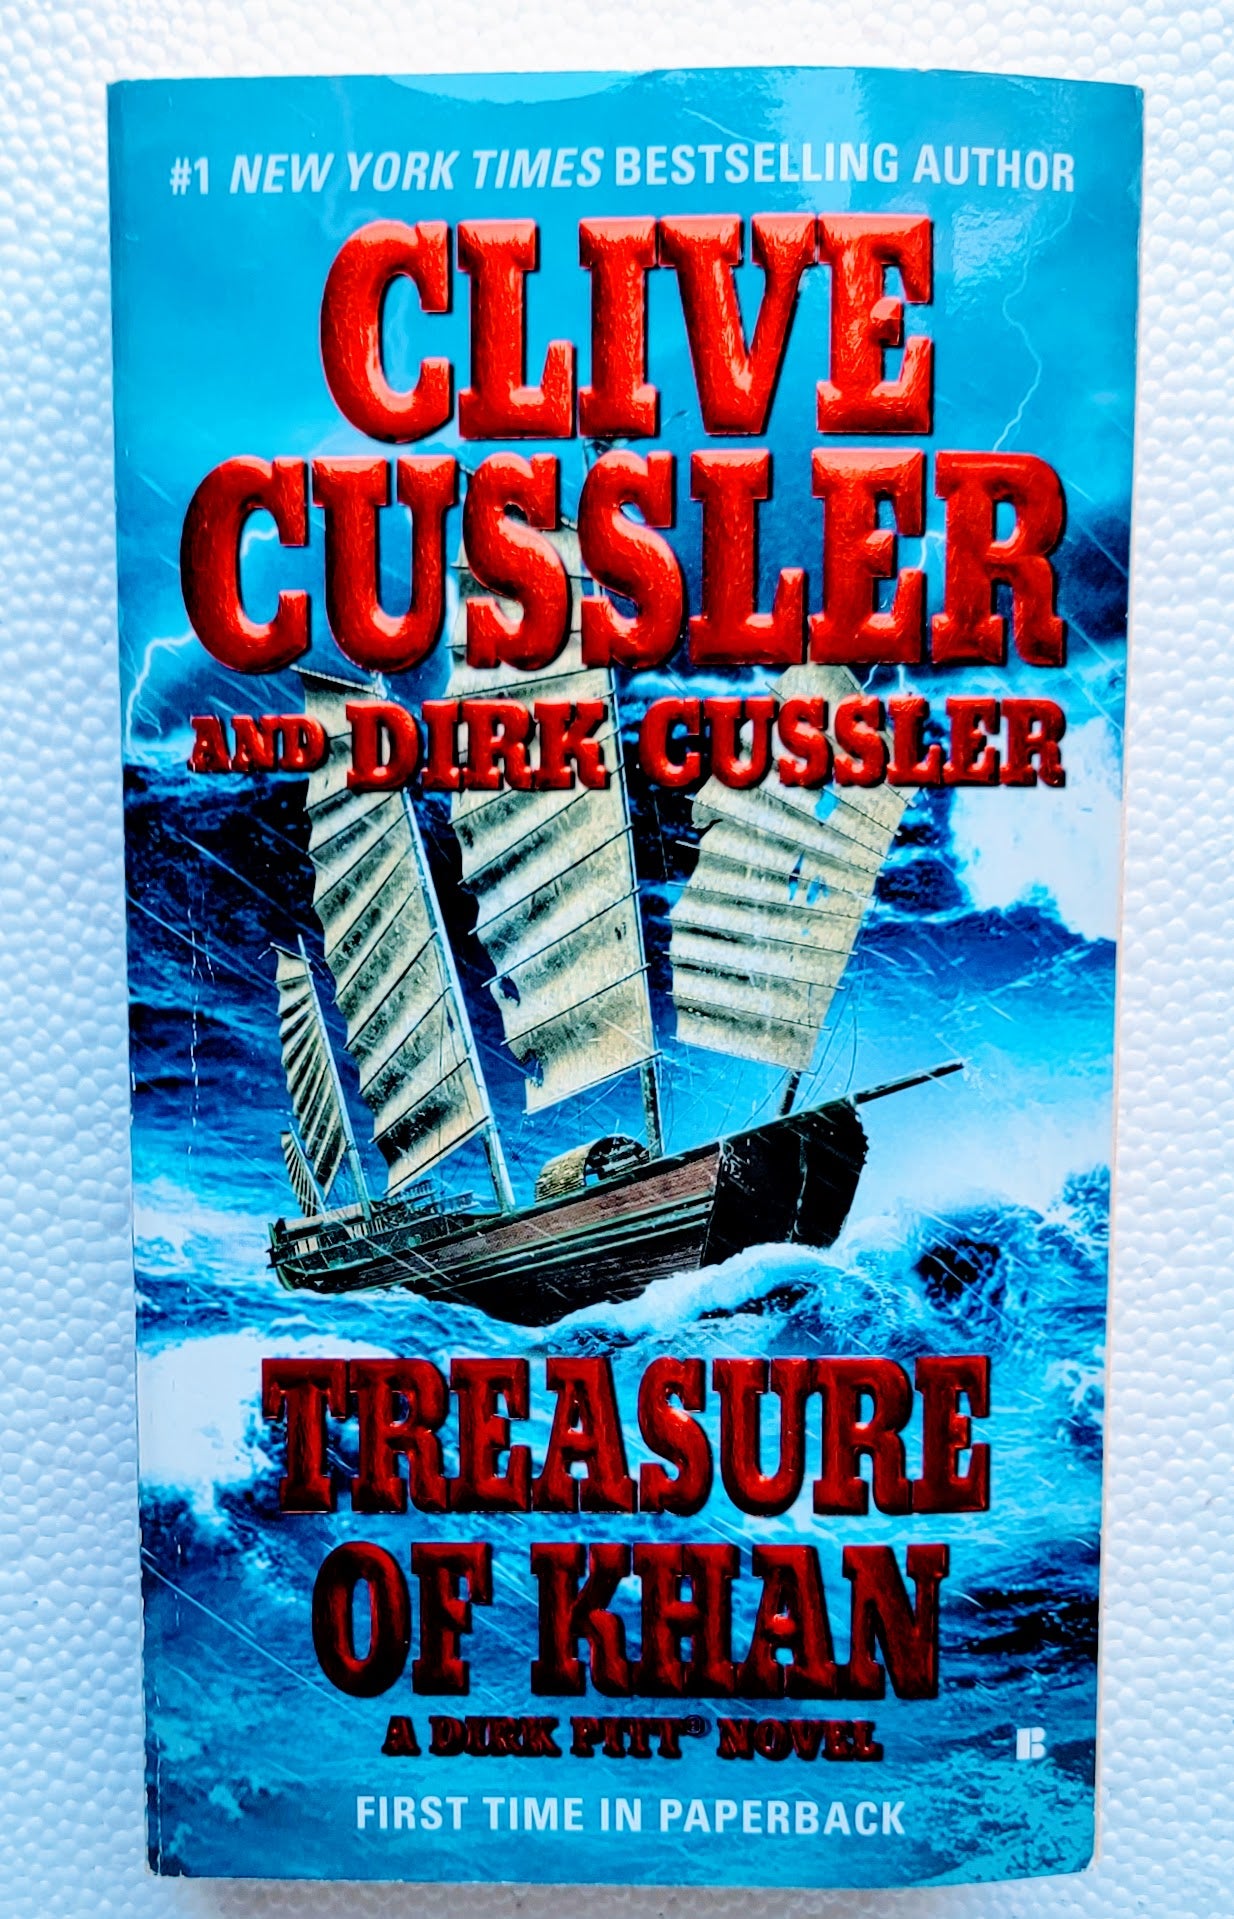 Treasure of Khan: An Unrelenting Adventure from the Dirk Pitt Book Series by Clive Cussler (and Dirk Cussler)  Xclusive Collectibles   